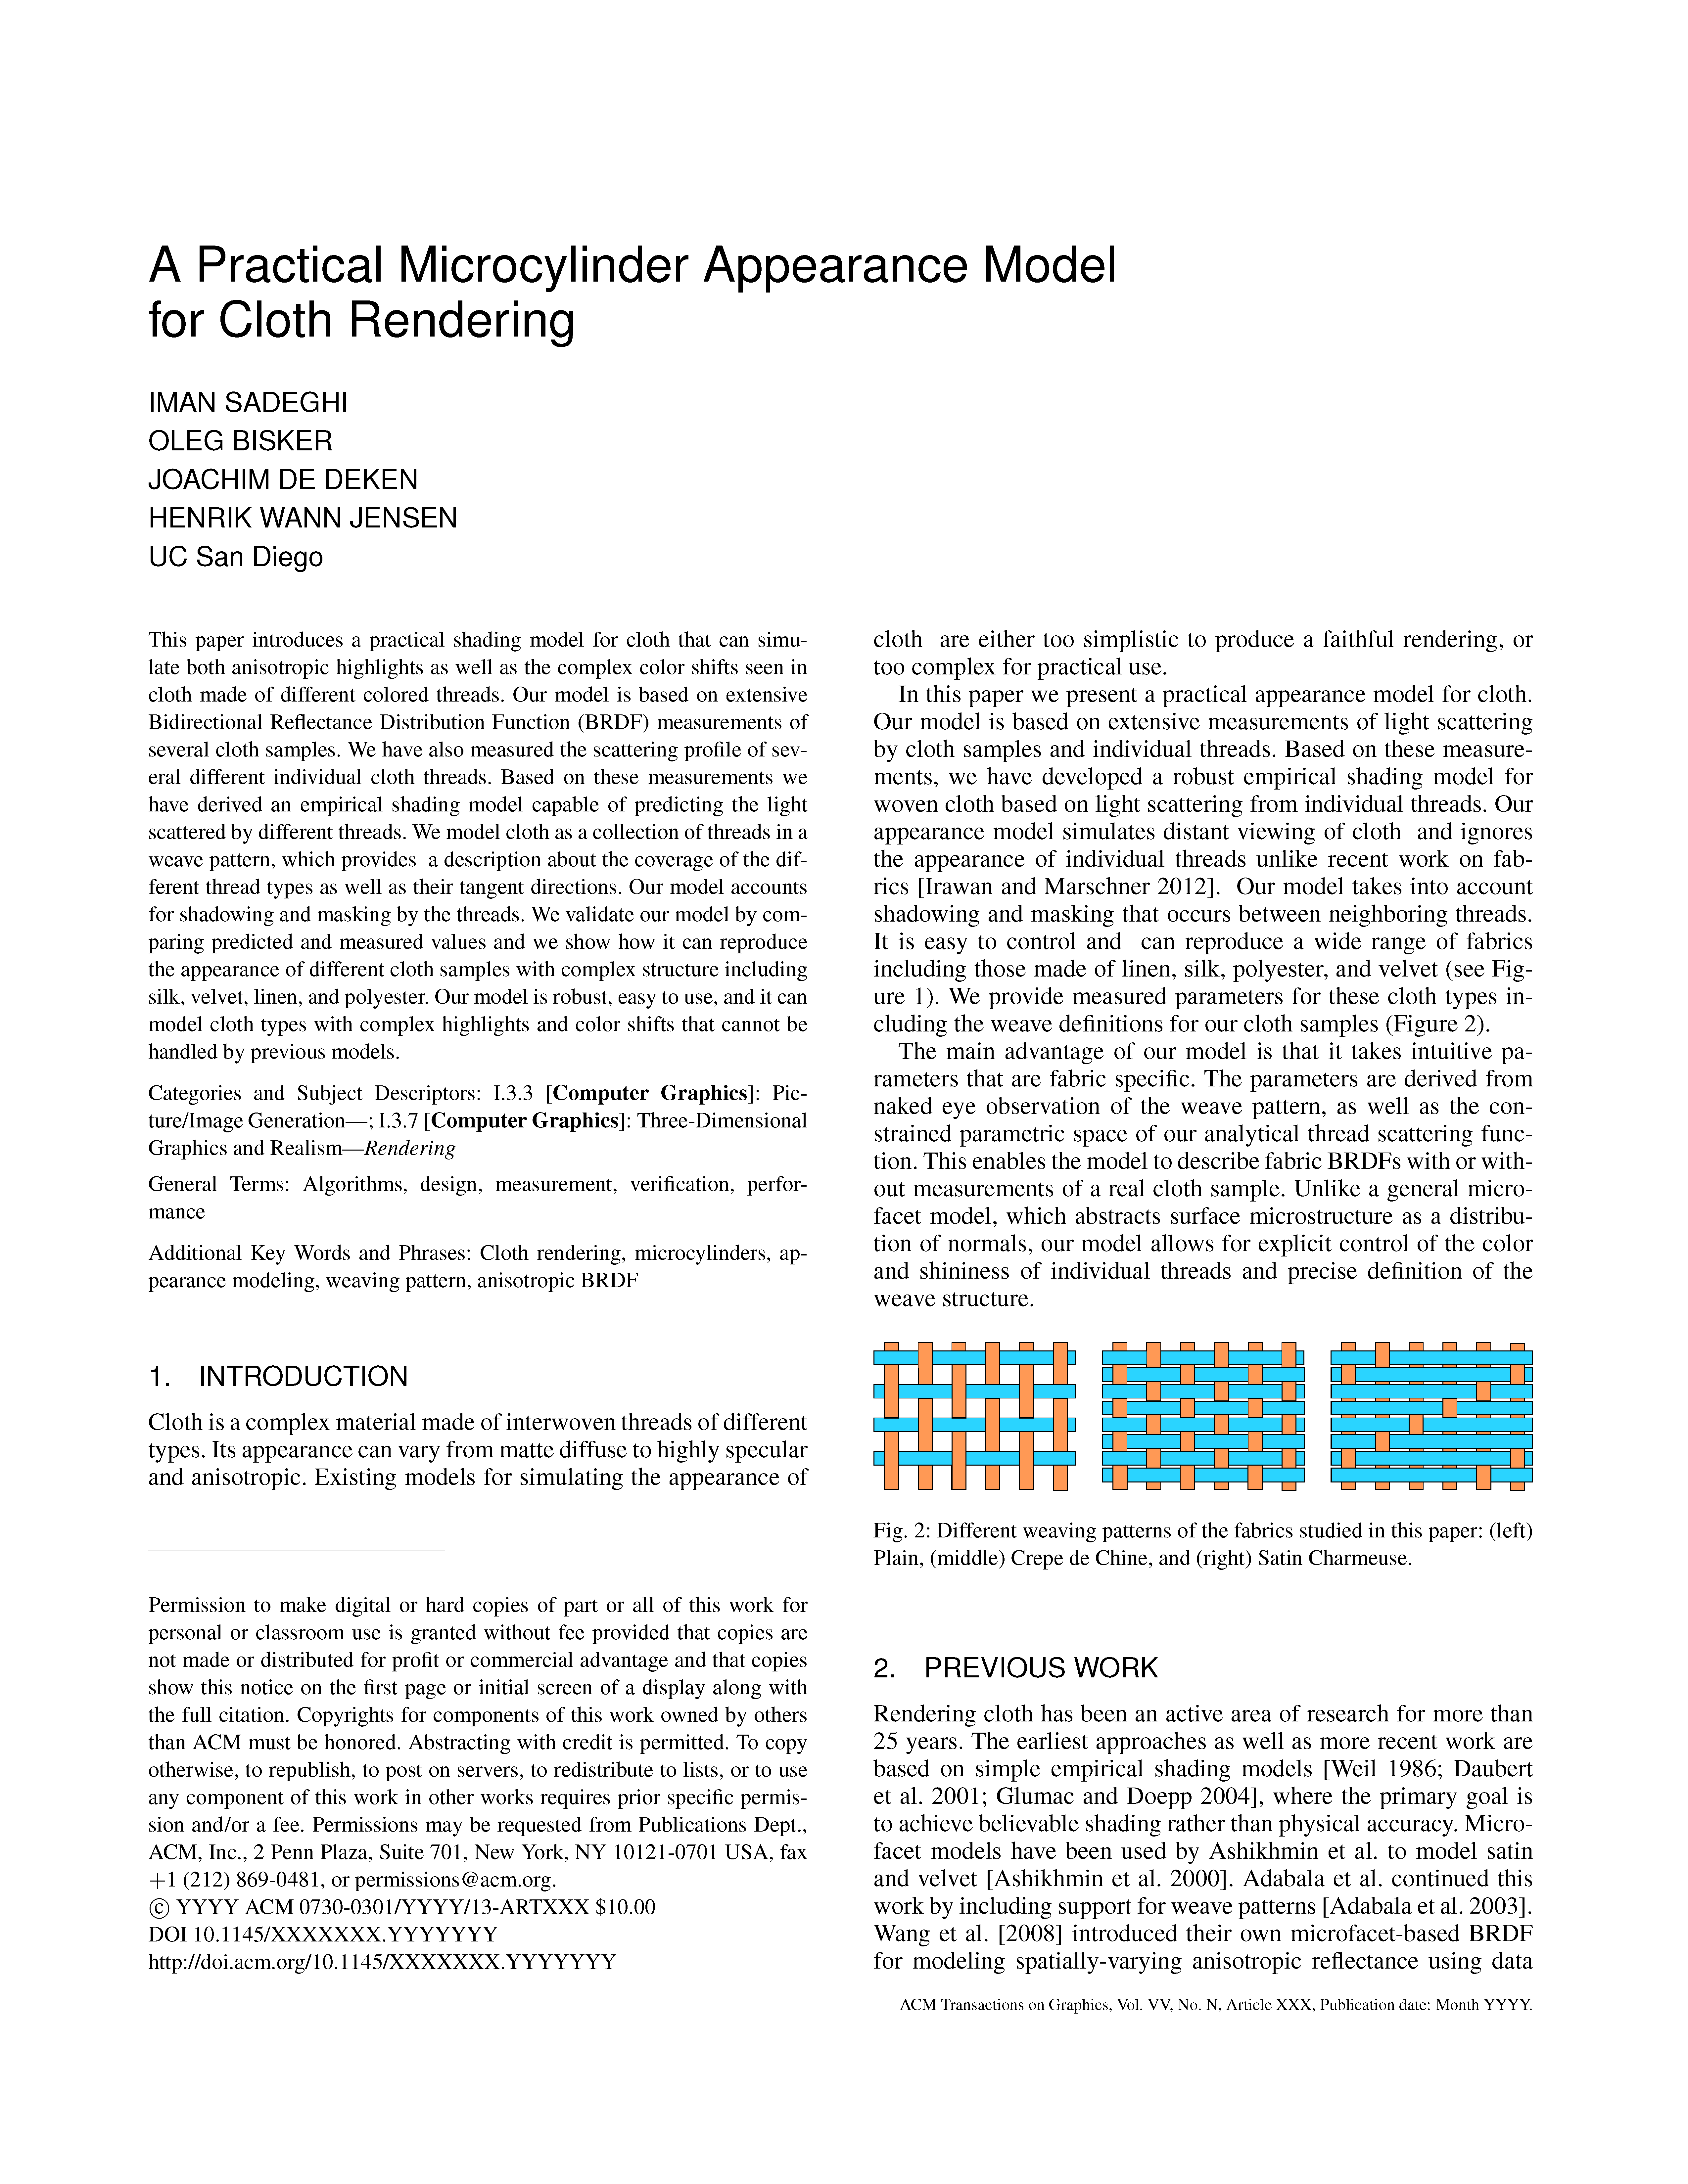 A Practical Microcylinder Appearance Model for Cloth Rendering Page 1